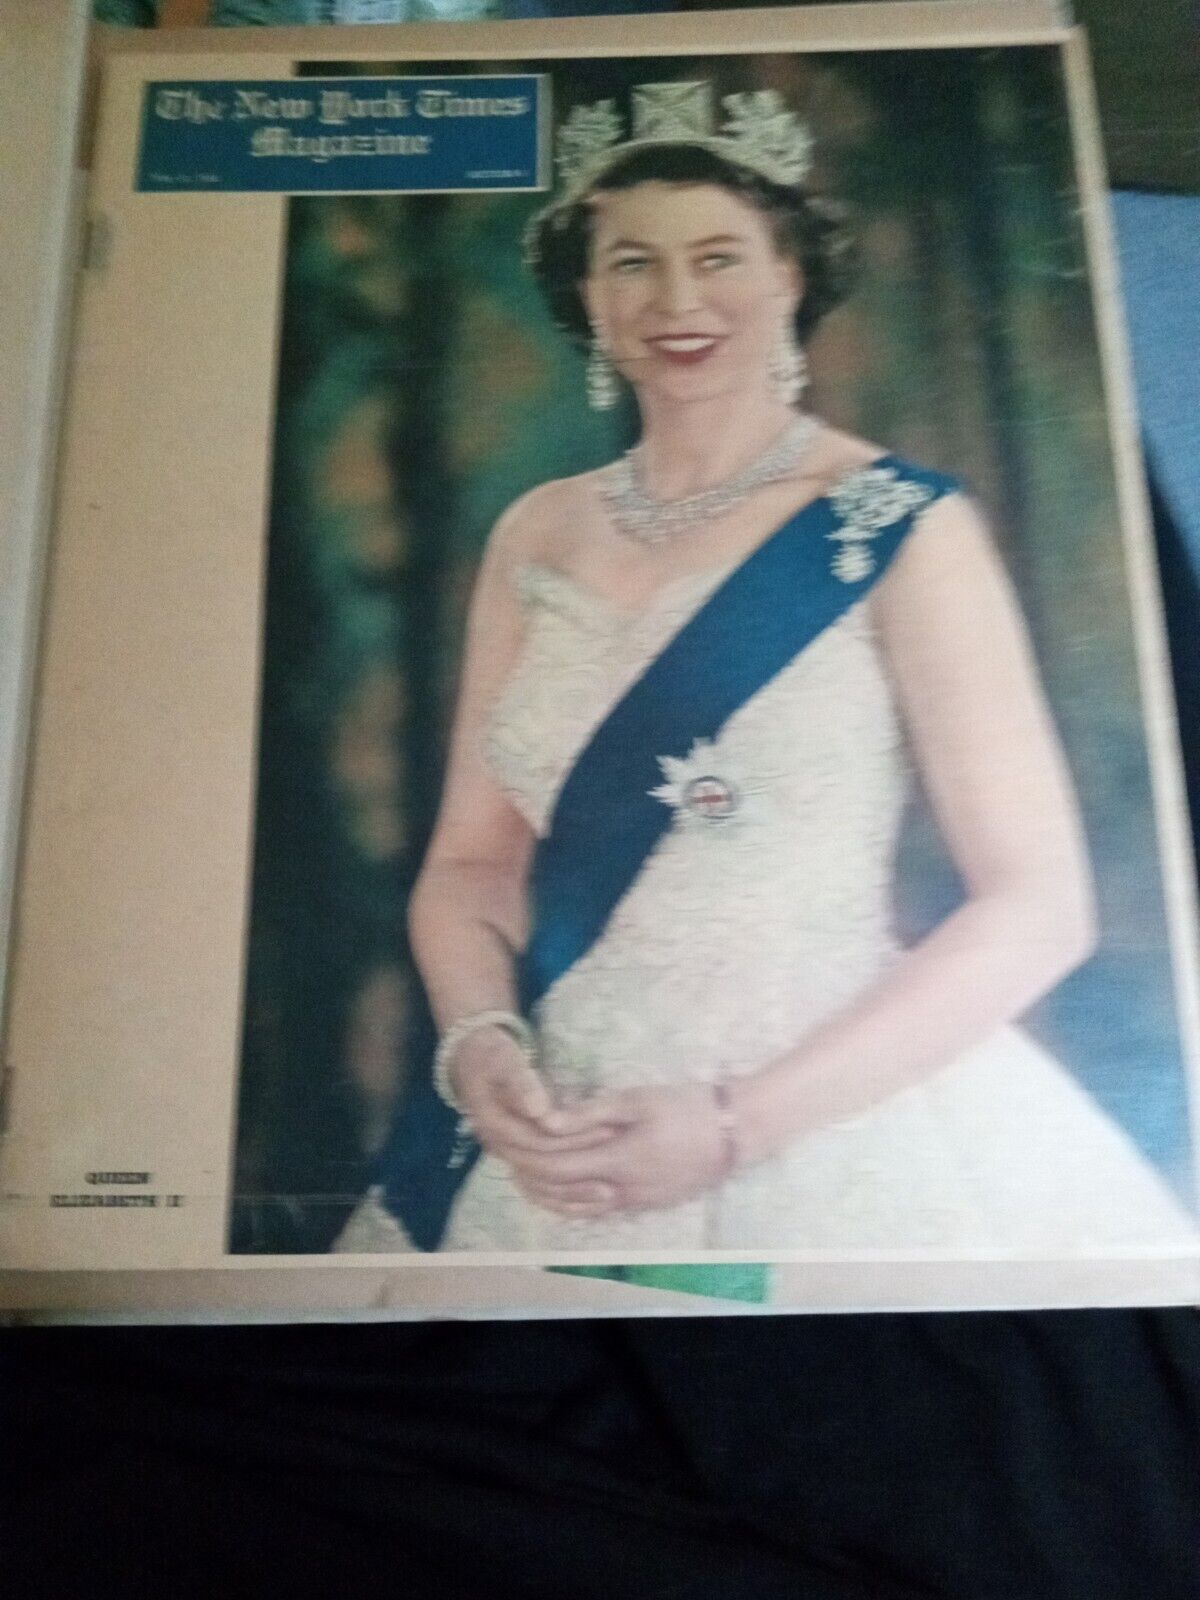 The New York Times Magazine Section 6. May 31, 1953. Queen Elizabeth II